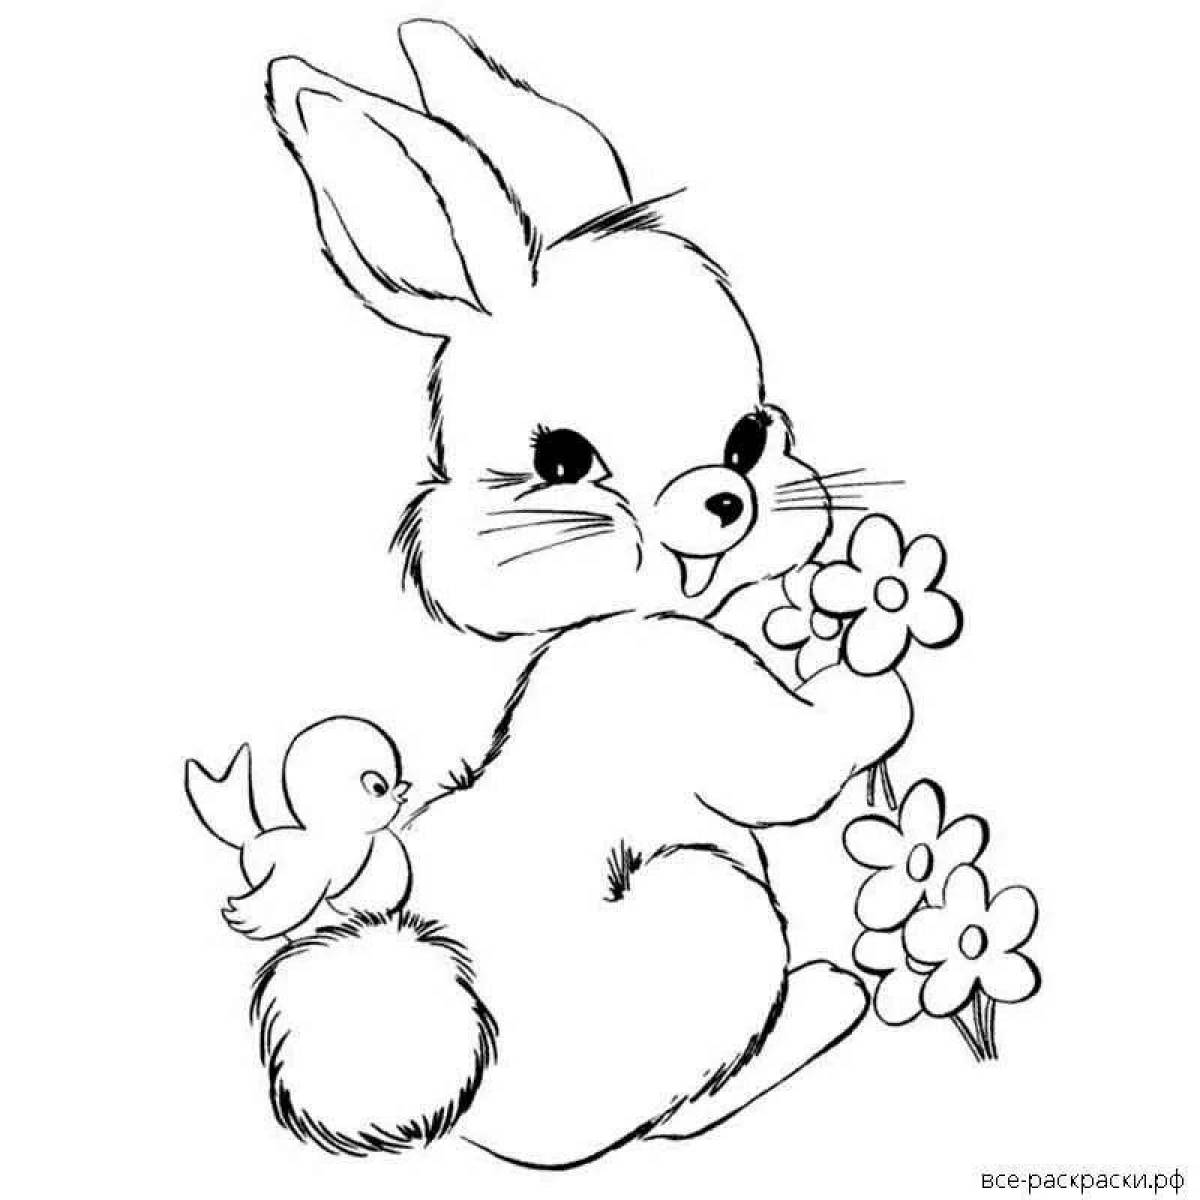 Adorable cat and hare coloring page